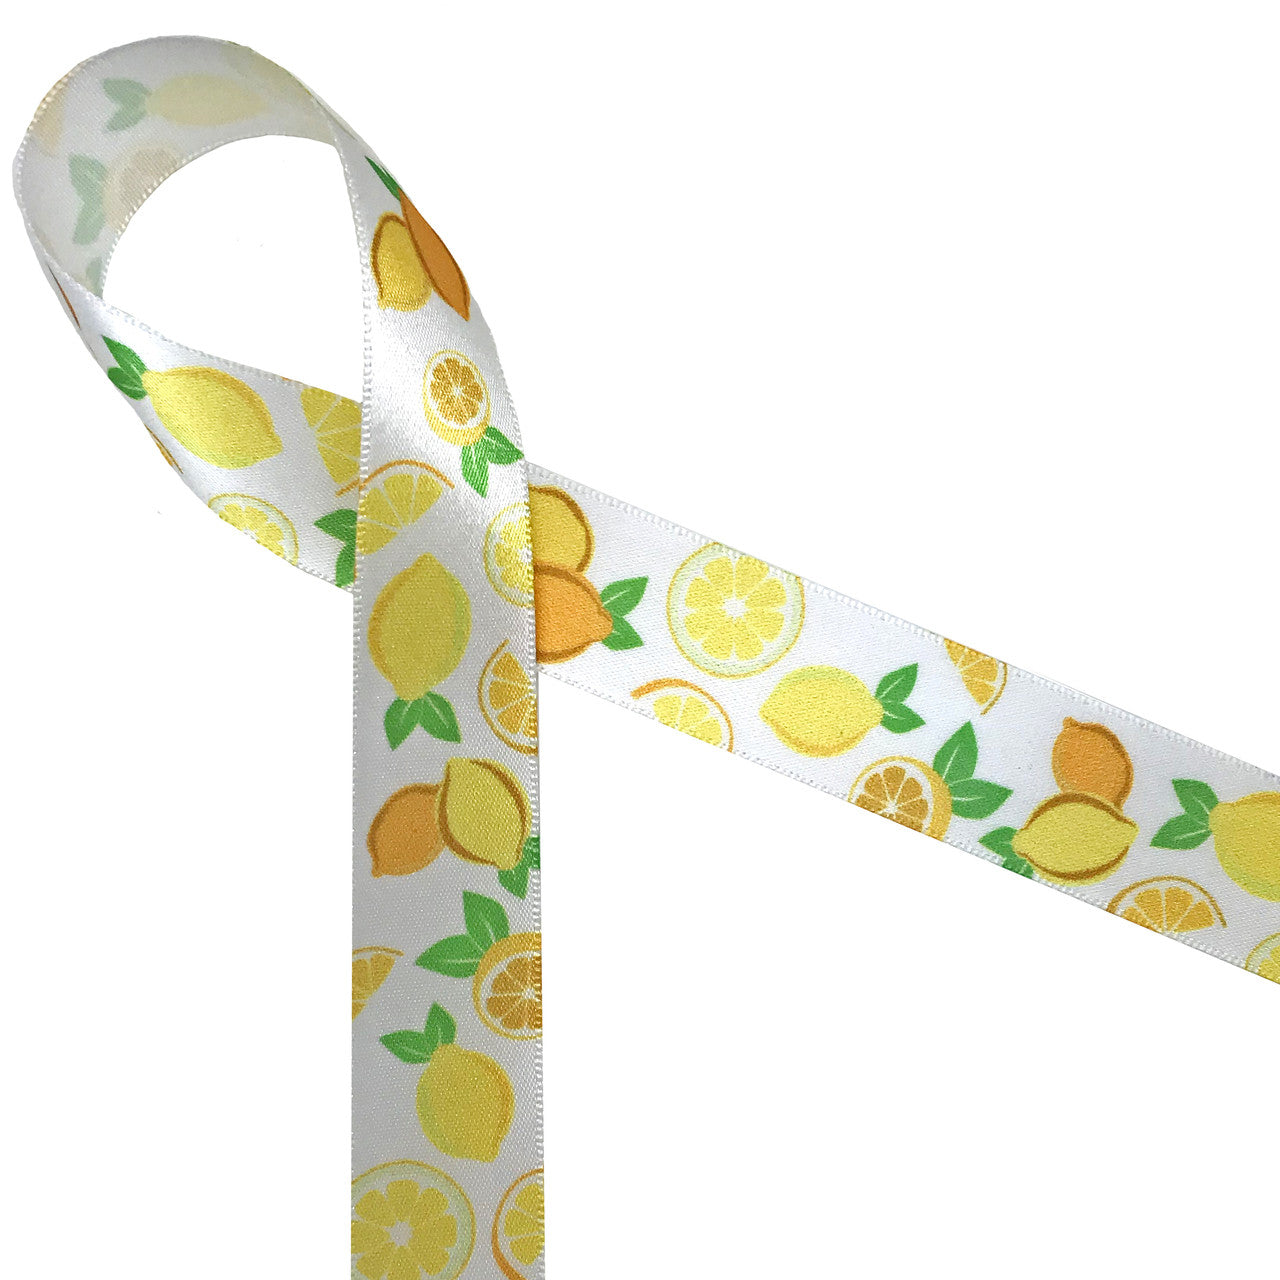 Lemons in yellow and orange whole and sliced with green leaves are such a fun and happy addition  to any party! Ours is printed on 7/8" white single face satin ribbon.